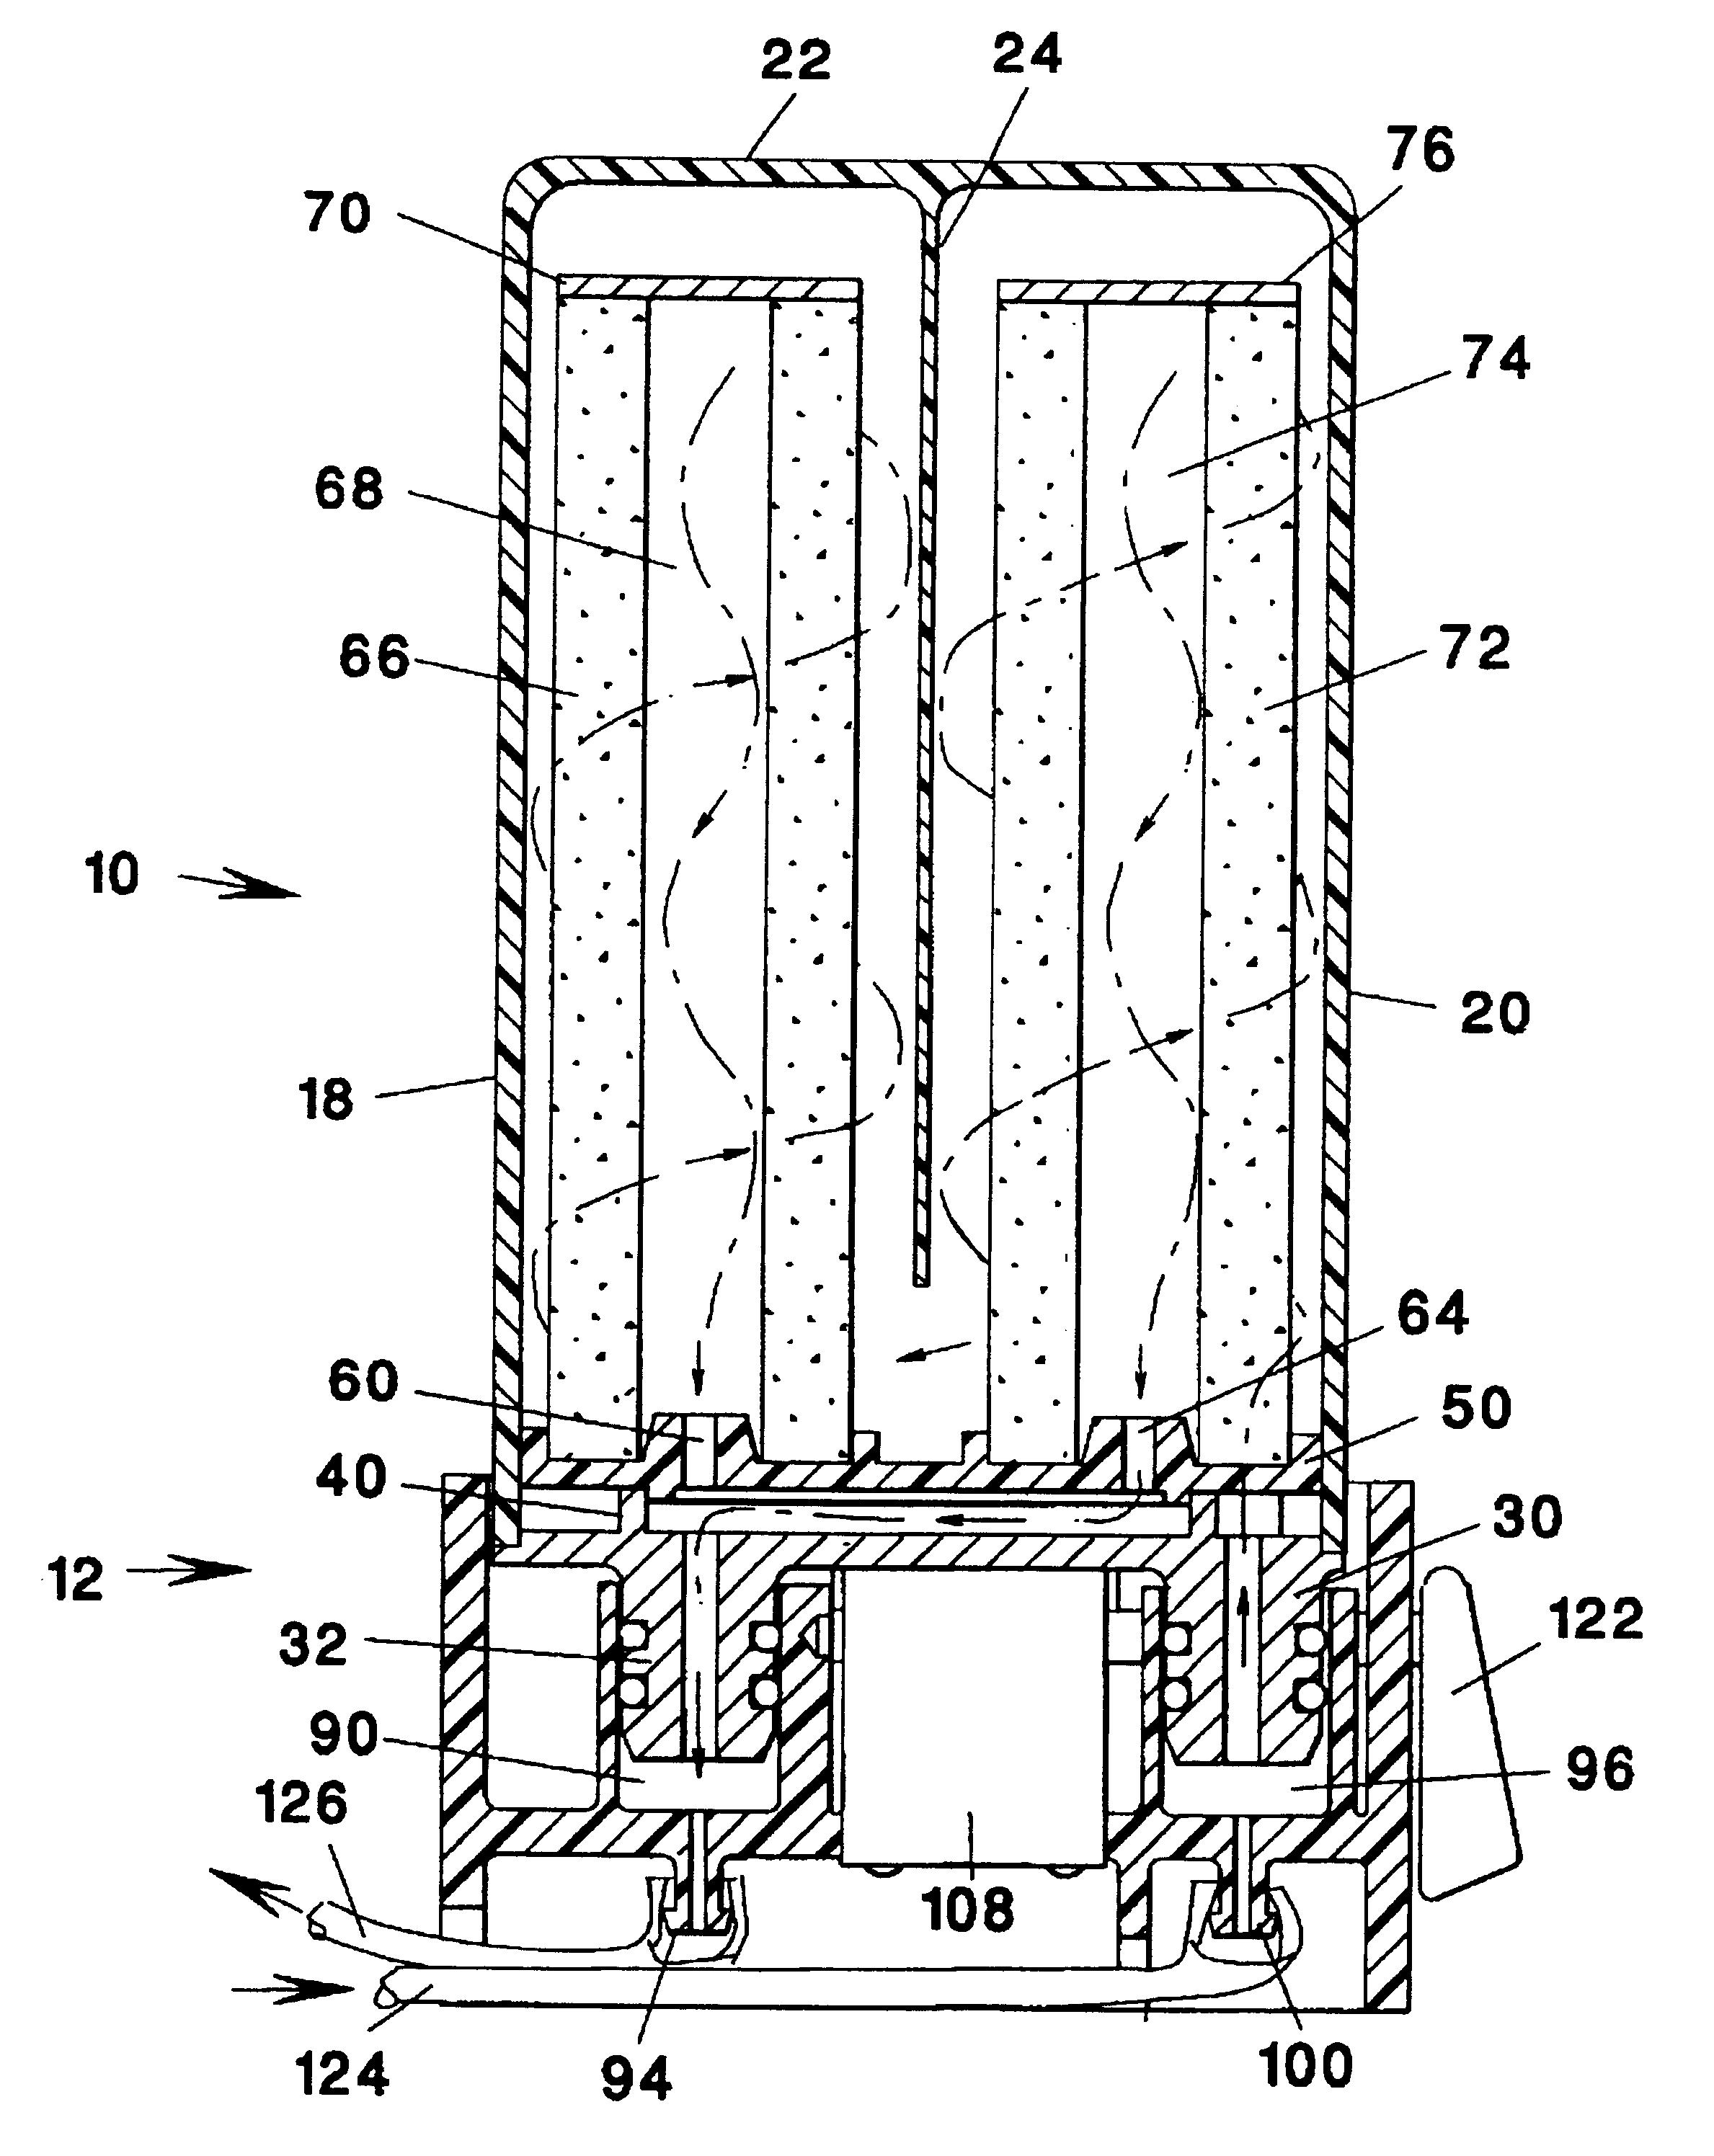 Water treatment cartridge and base